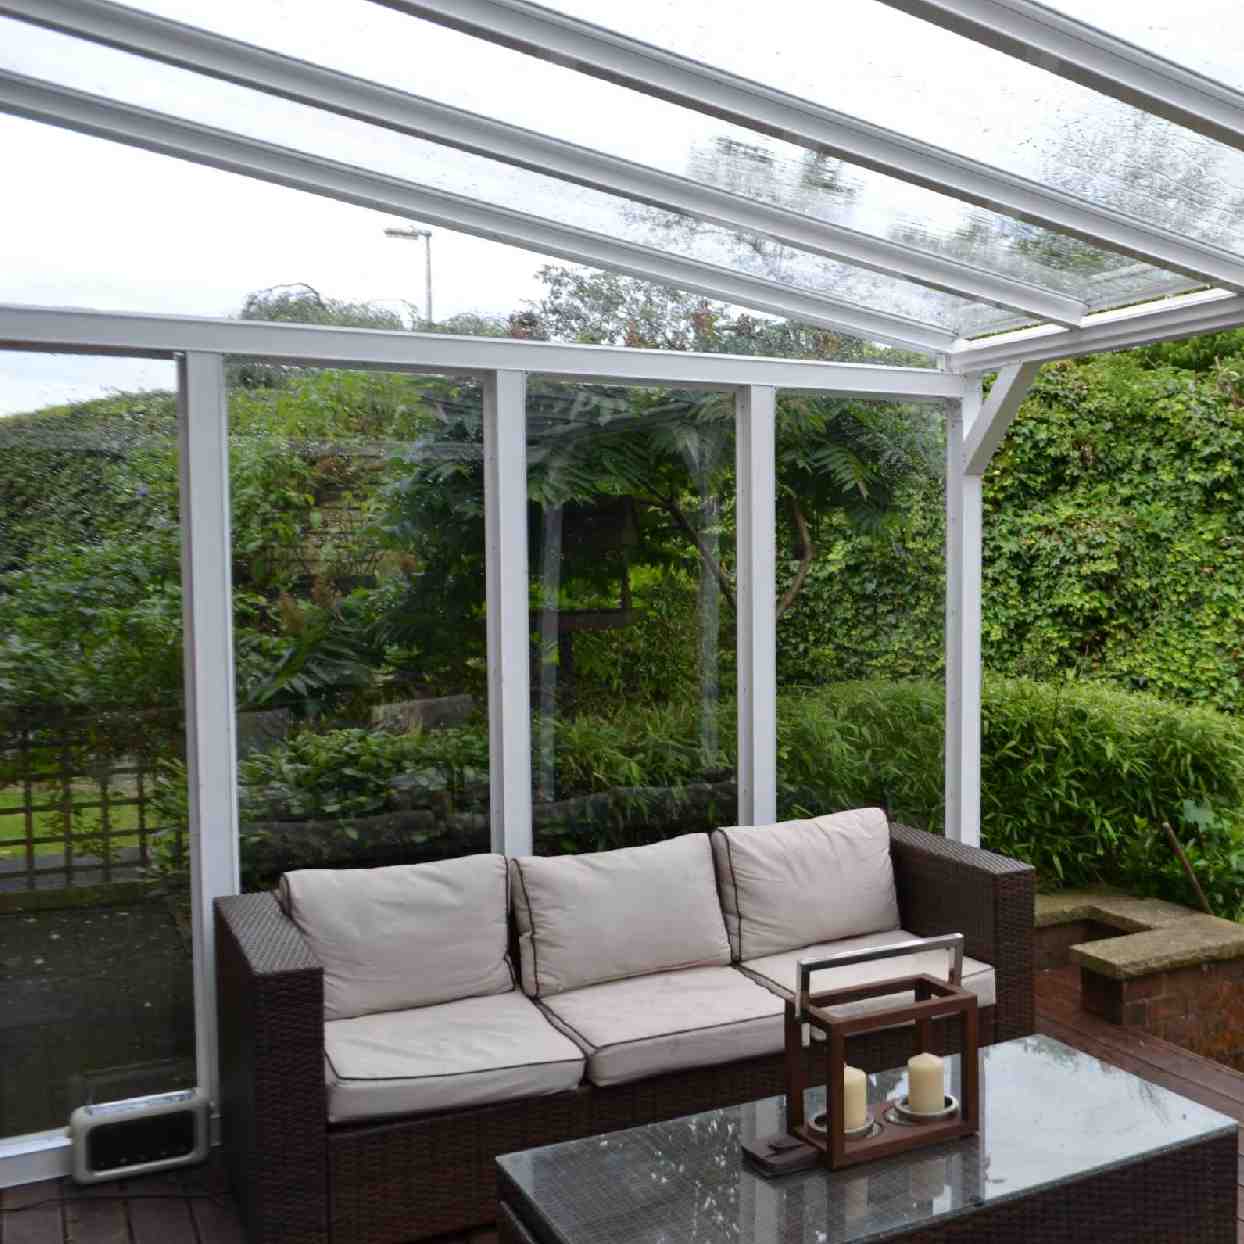 Buy Omega Verandah White with 6mm Glass Clear Plate Polycarbonate Glazing - 8.4m (W) x 3.0m (P), (4) Supporting Posts online today